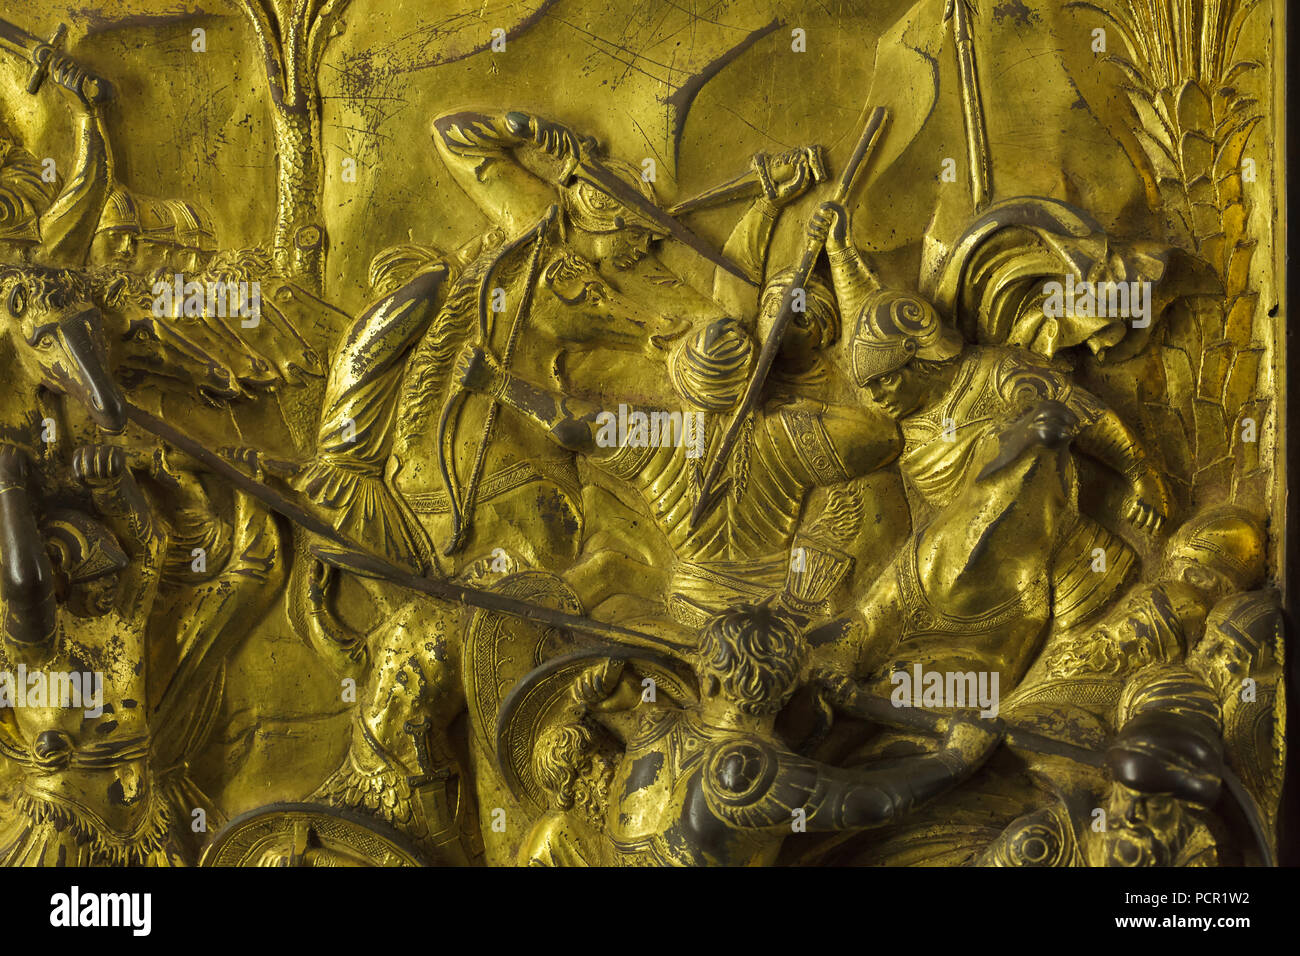 Battles between the Israelites and the Philistines depicted in the gilded bronze panel from the Gates of Paradise (Porta del Paradiso) designed by Italian Early Renaissance sculptor Lorenzo Ghiberti for the Florence Baptistery (Battistero di San Giovanni), now on display in the Museo dell'Opera del Duomo (Museum of the Works of the Florence Cathedral) in Florence, Tuscany, Italy. Stock Photo